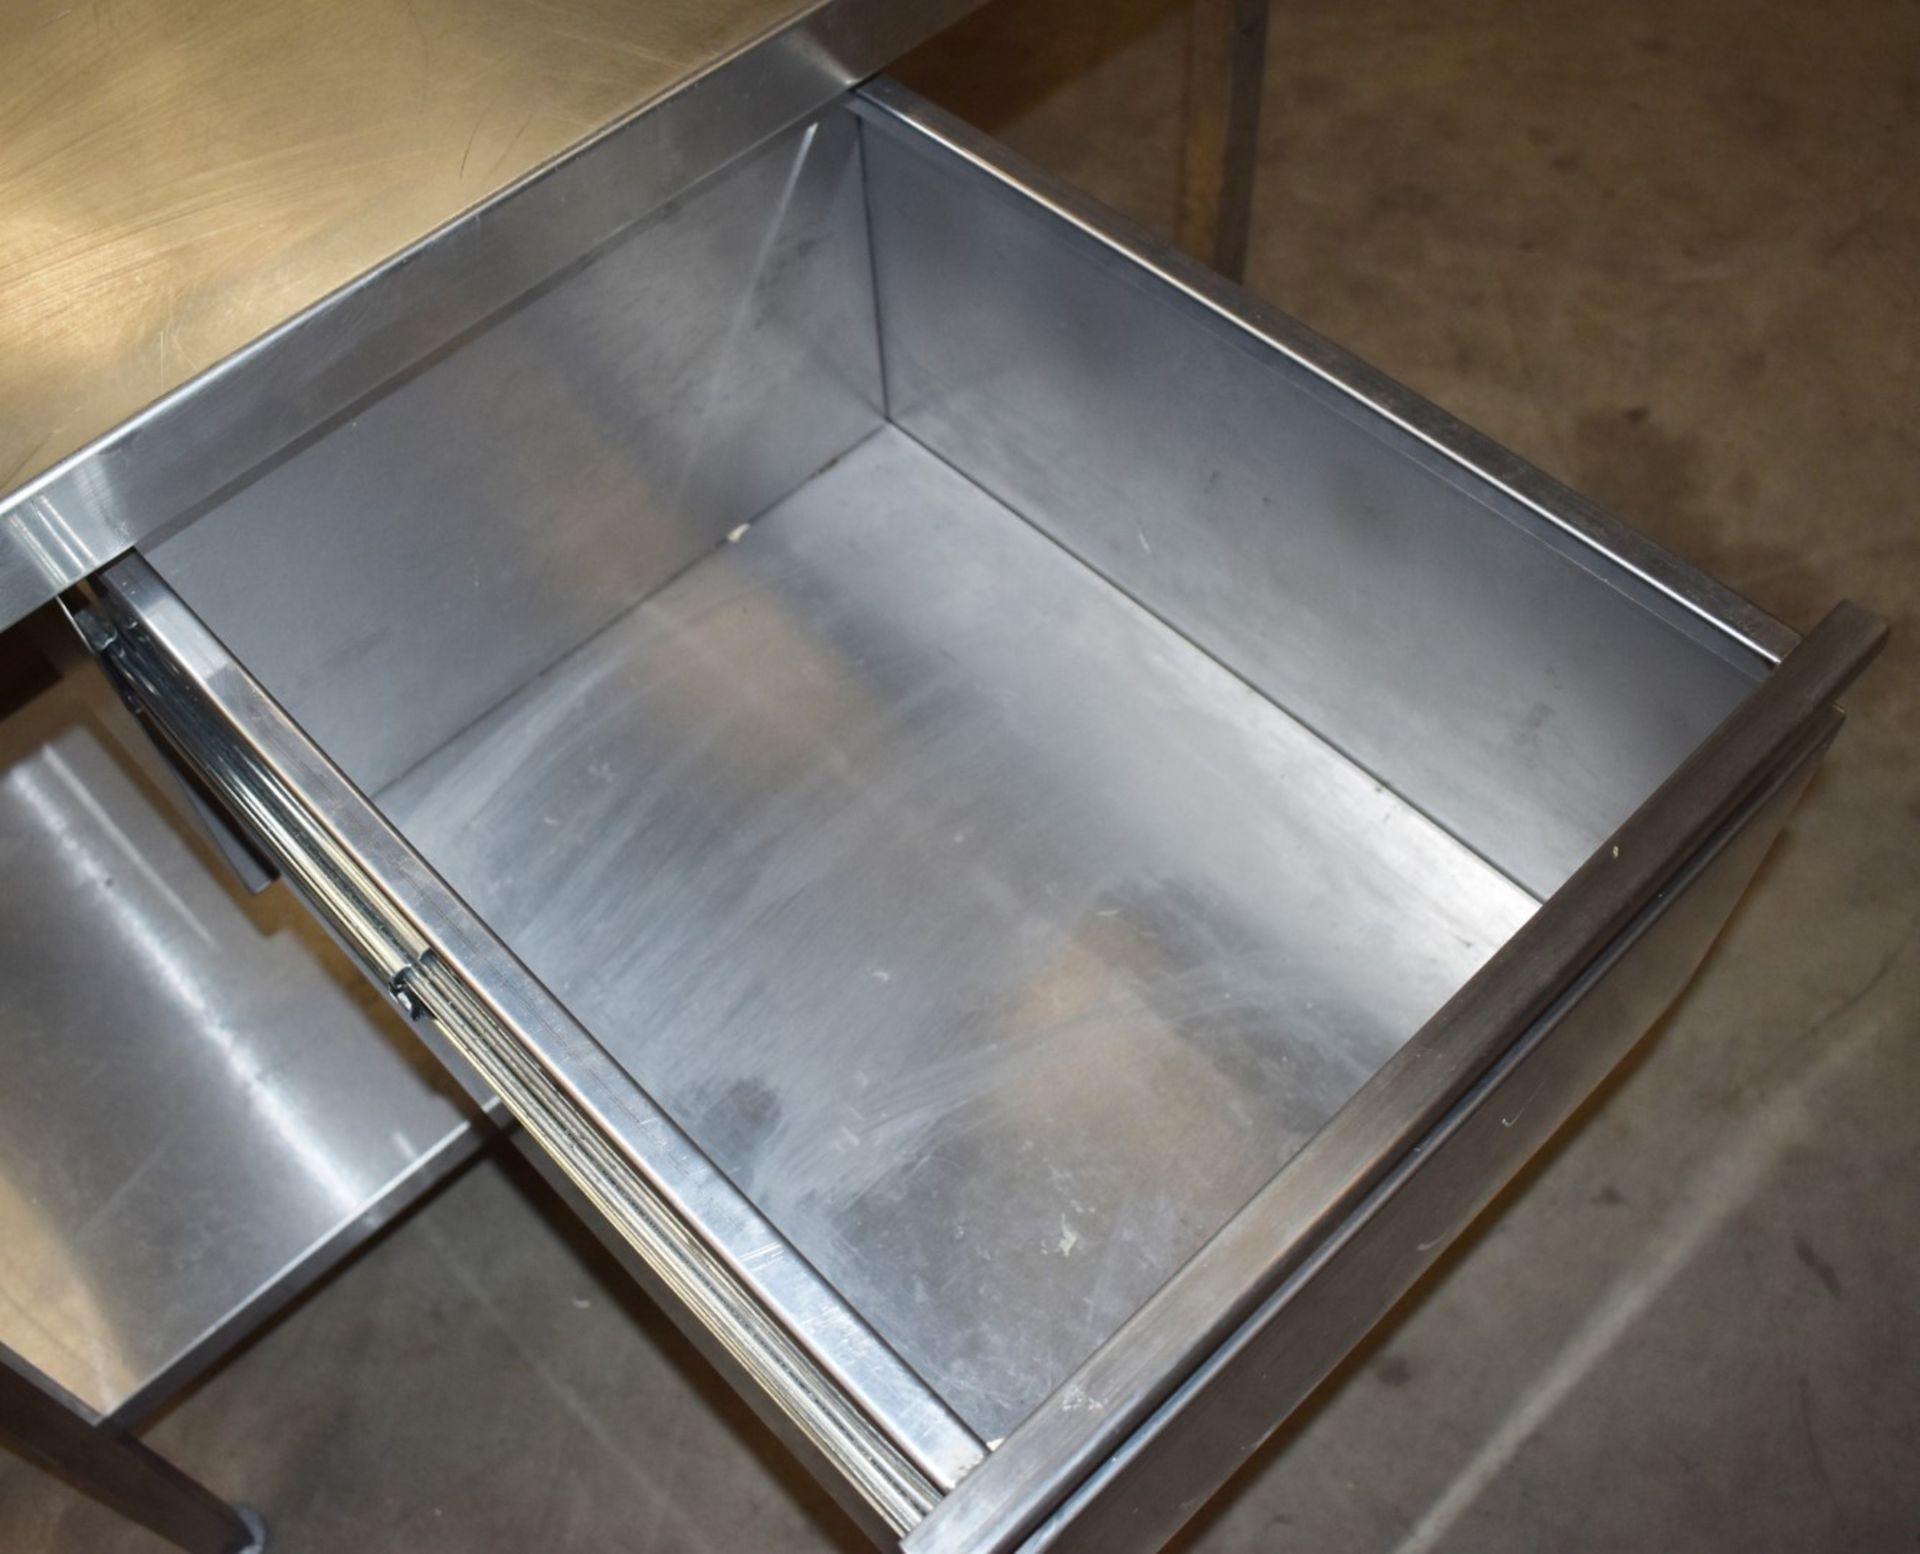 1 x Stainless Steel Prep Bench With Undershelf, Upstand and Central Drawer - H86 x W100 x D70 - Image 3 of 6